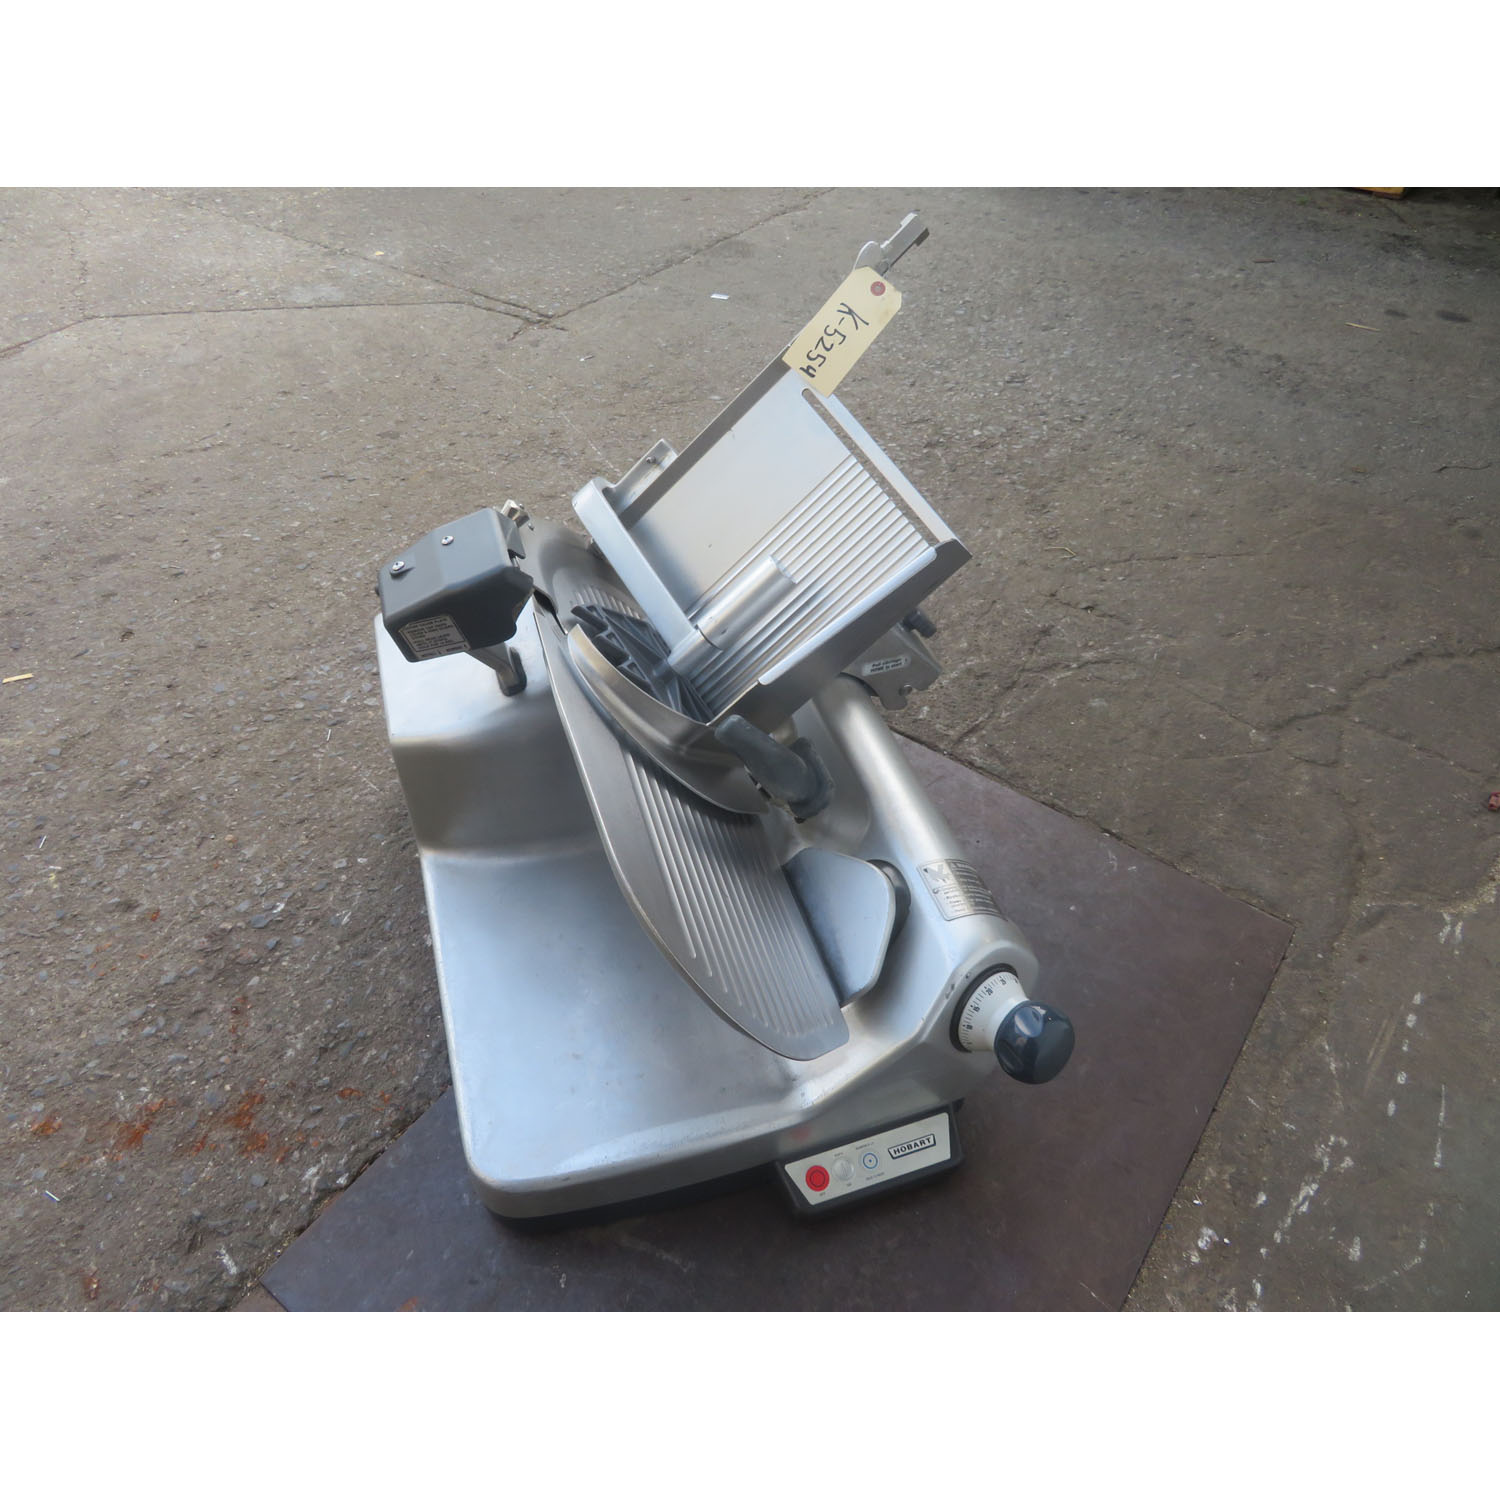 Hobart 3813 Meat Slicer, Used Great Condition image 1